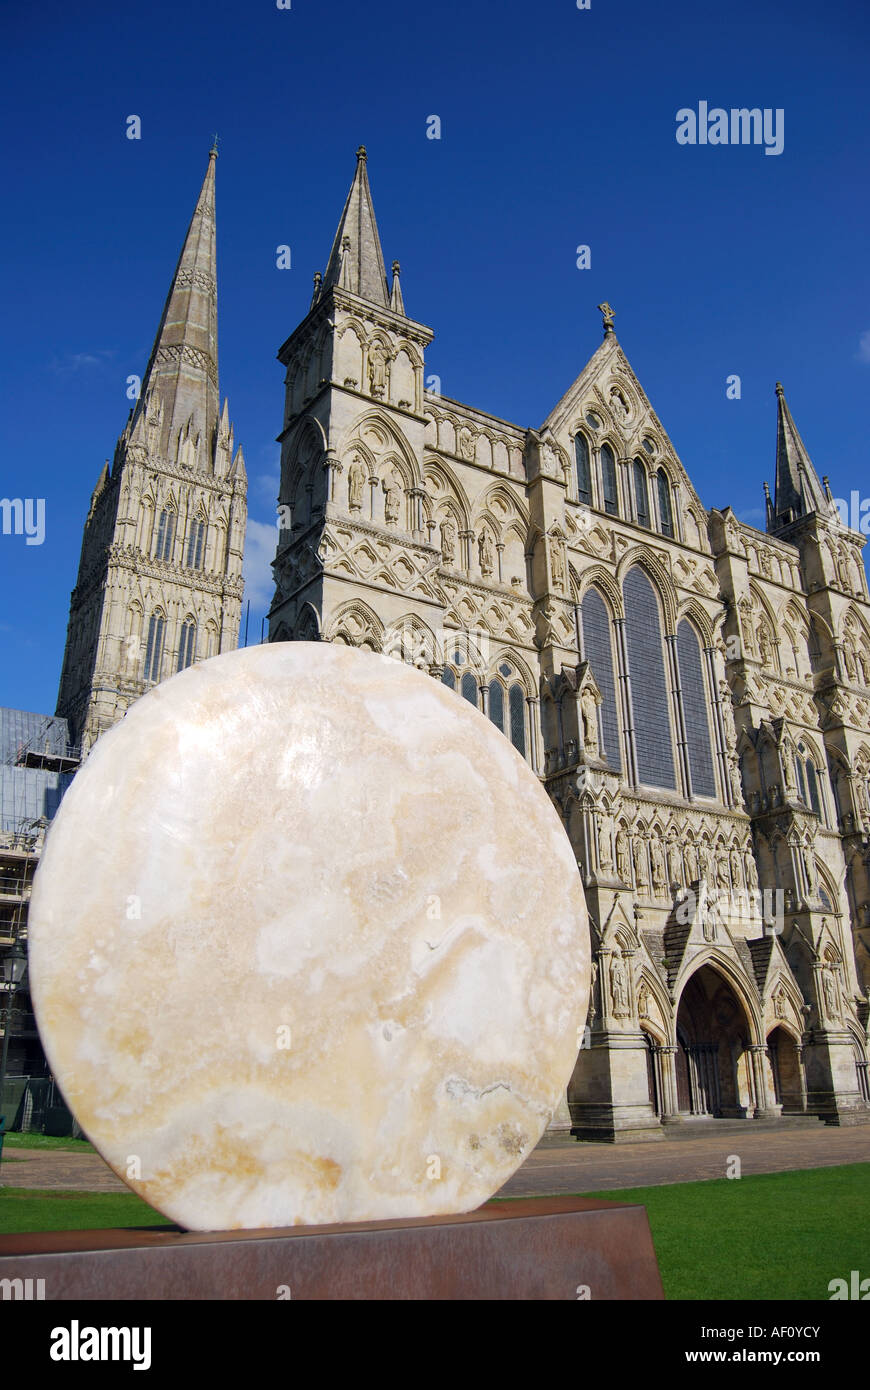 Circular stone sculpture and West facade, Salisbury Cathedral, Cathedral Close, Salisbury, Wiltshire, England, United Kingdom Stock Photo